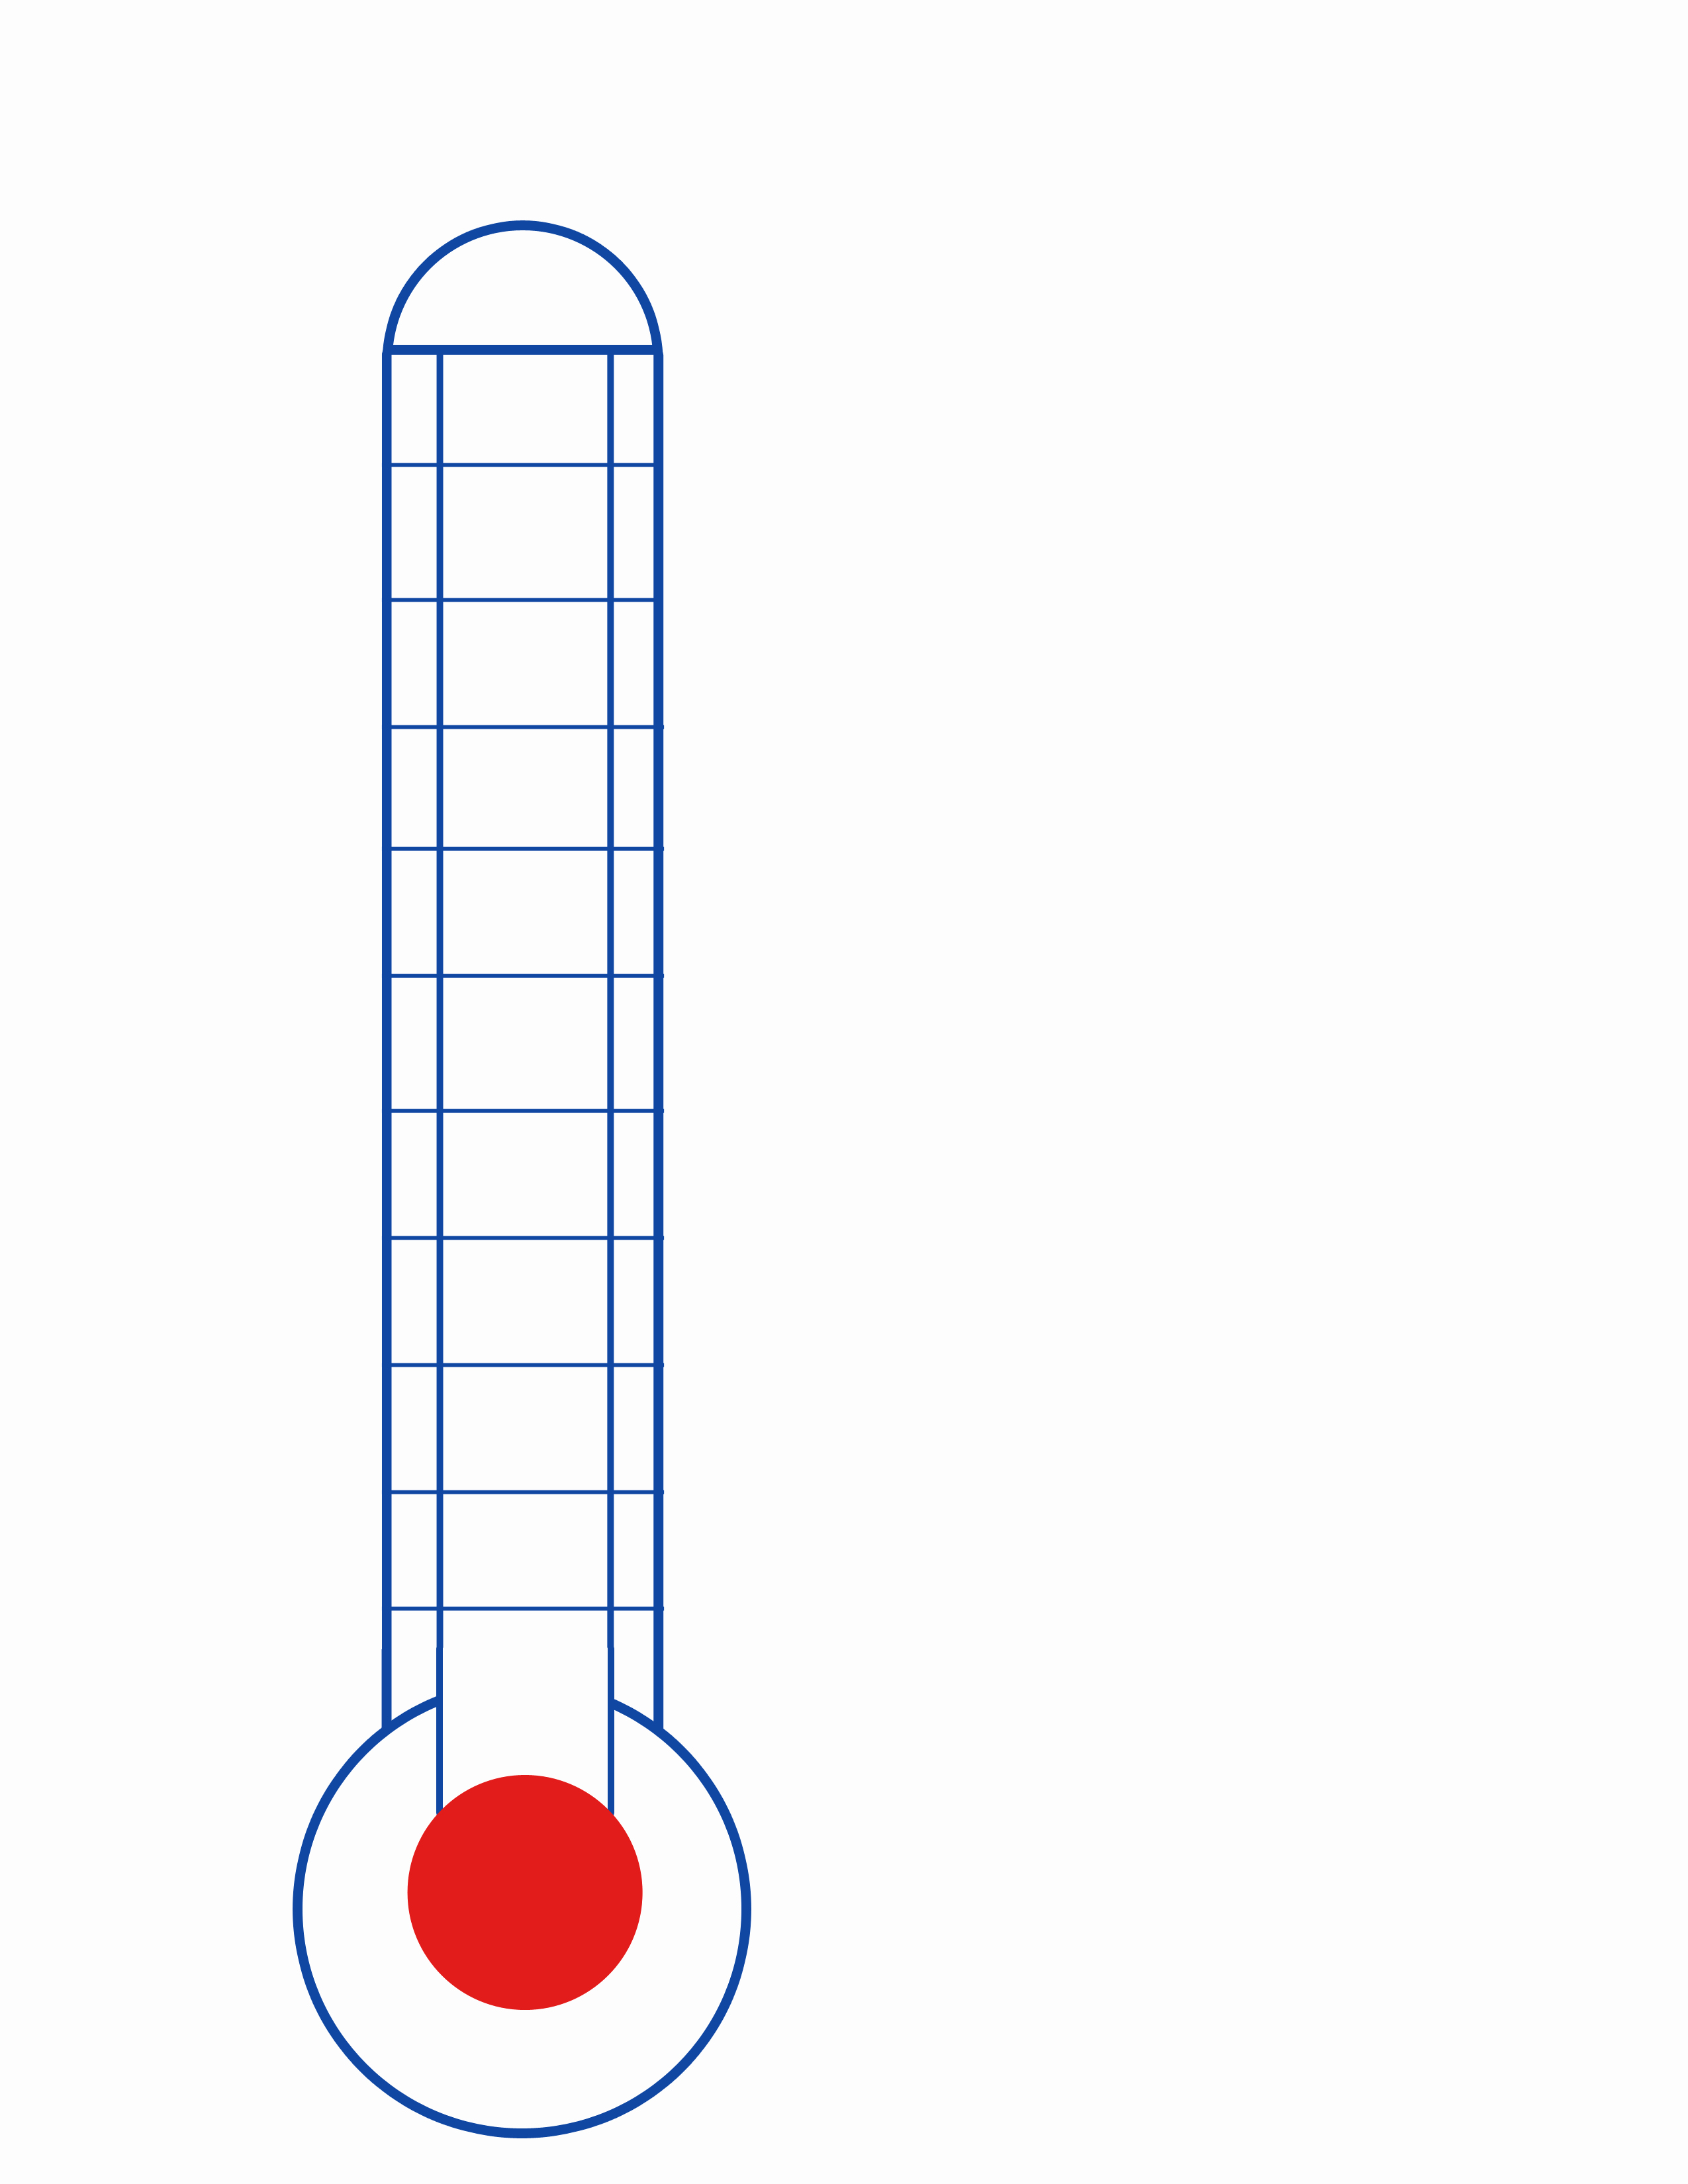 Fundraising thermometer Image Best Of Fundraising thermometer Template Blank thermometer